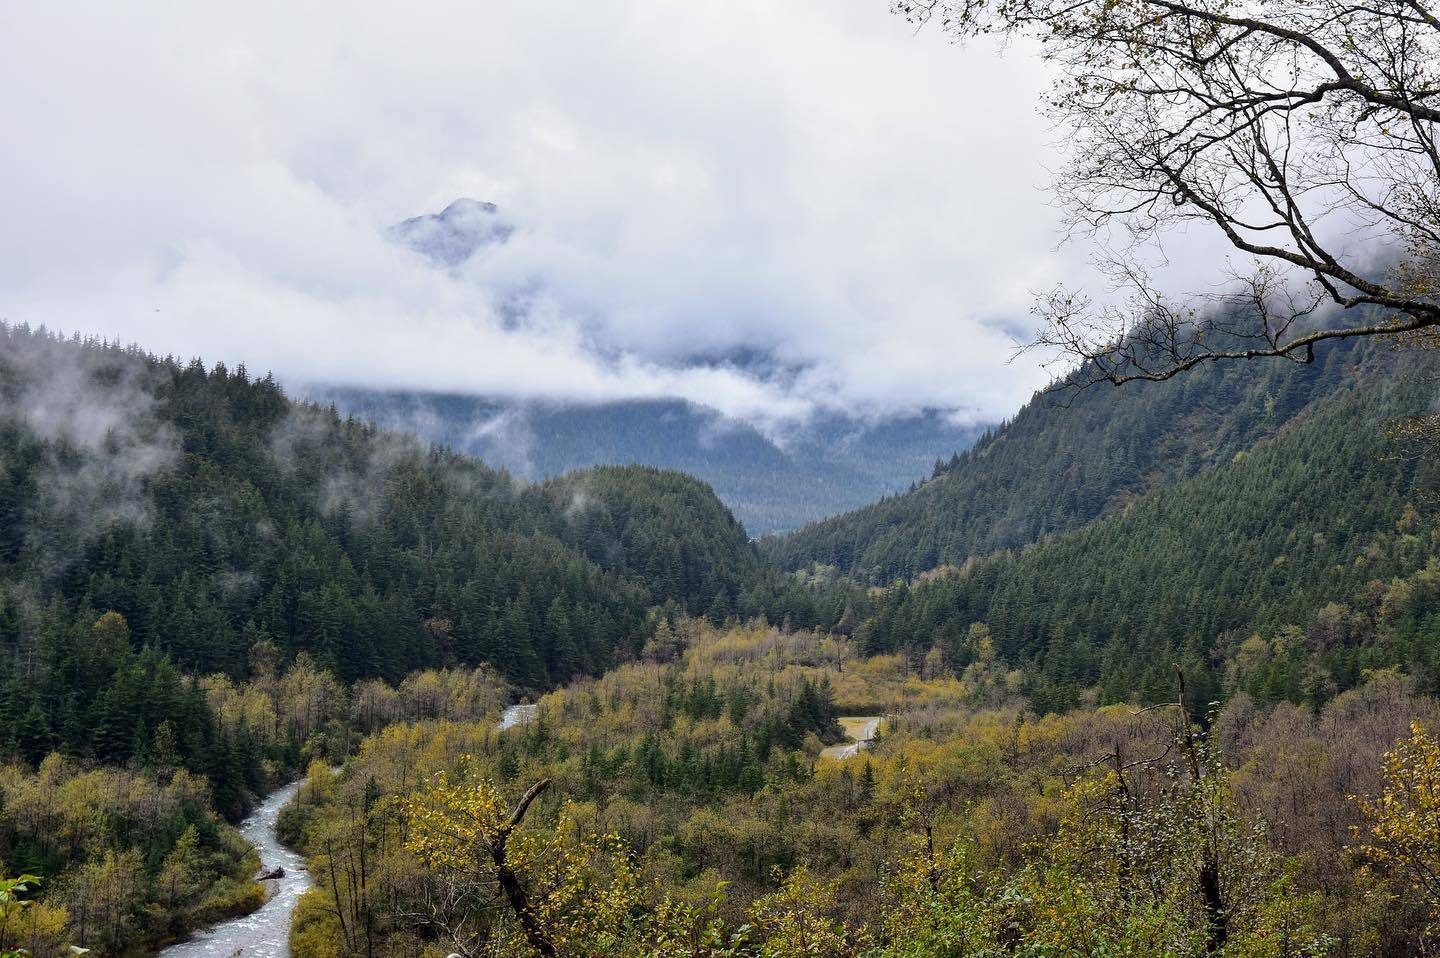 Basin Road and Gold Creek as seen from Perseverance Trail on Sept. 22, 2019. (Peter Segall / Juneau Empire File)